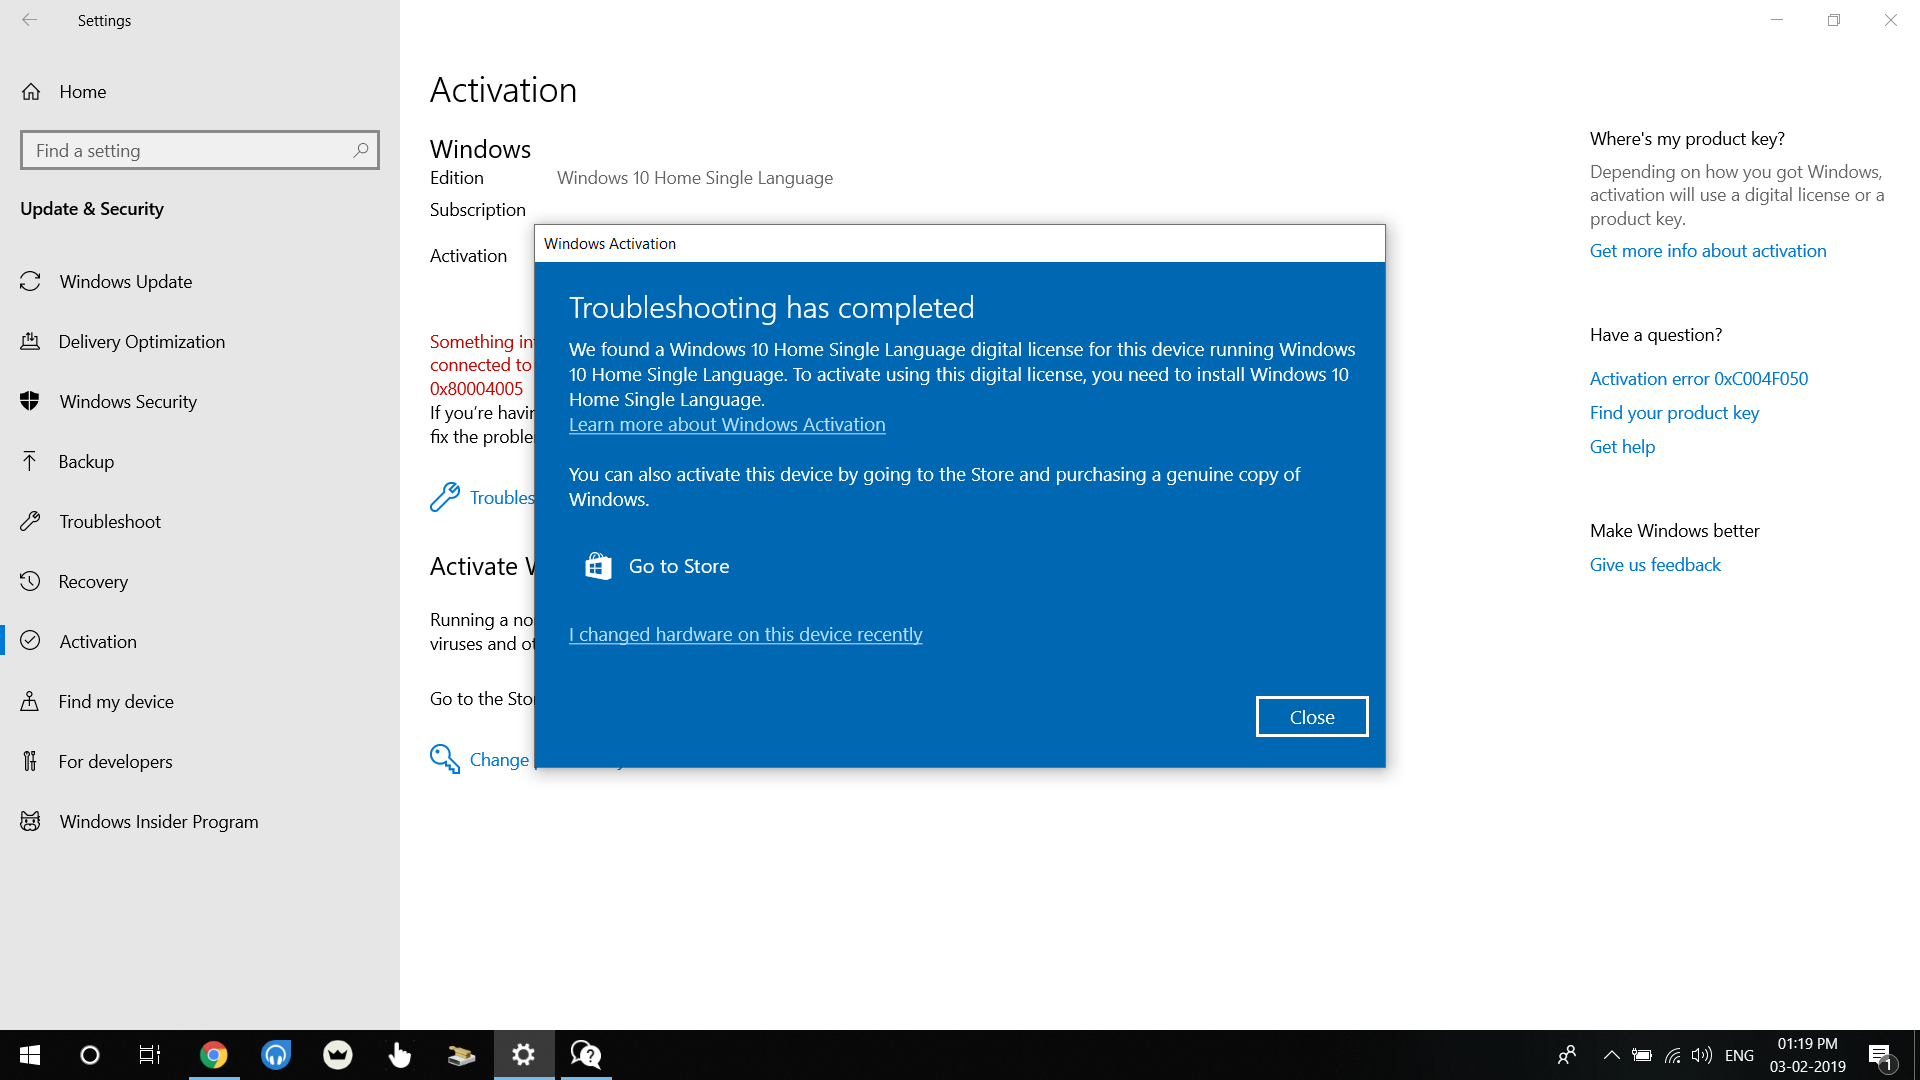 Windows 10 not activating after update 19afa2dc-f3a4-4f95-939c-ae0beff31660?upload=true.png